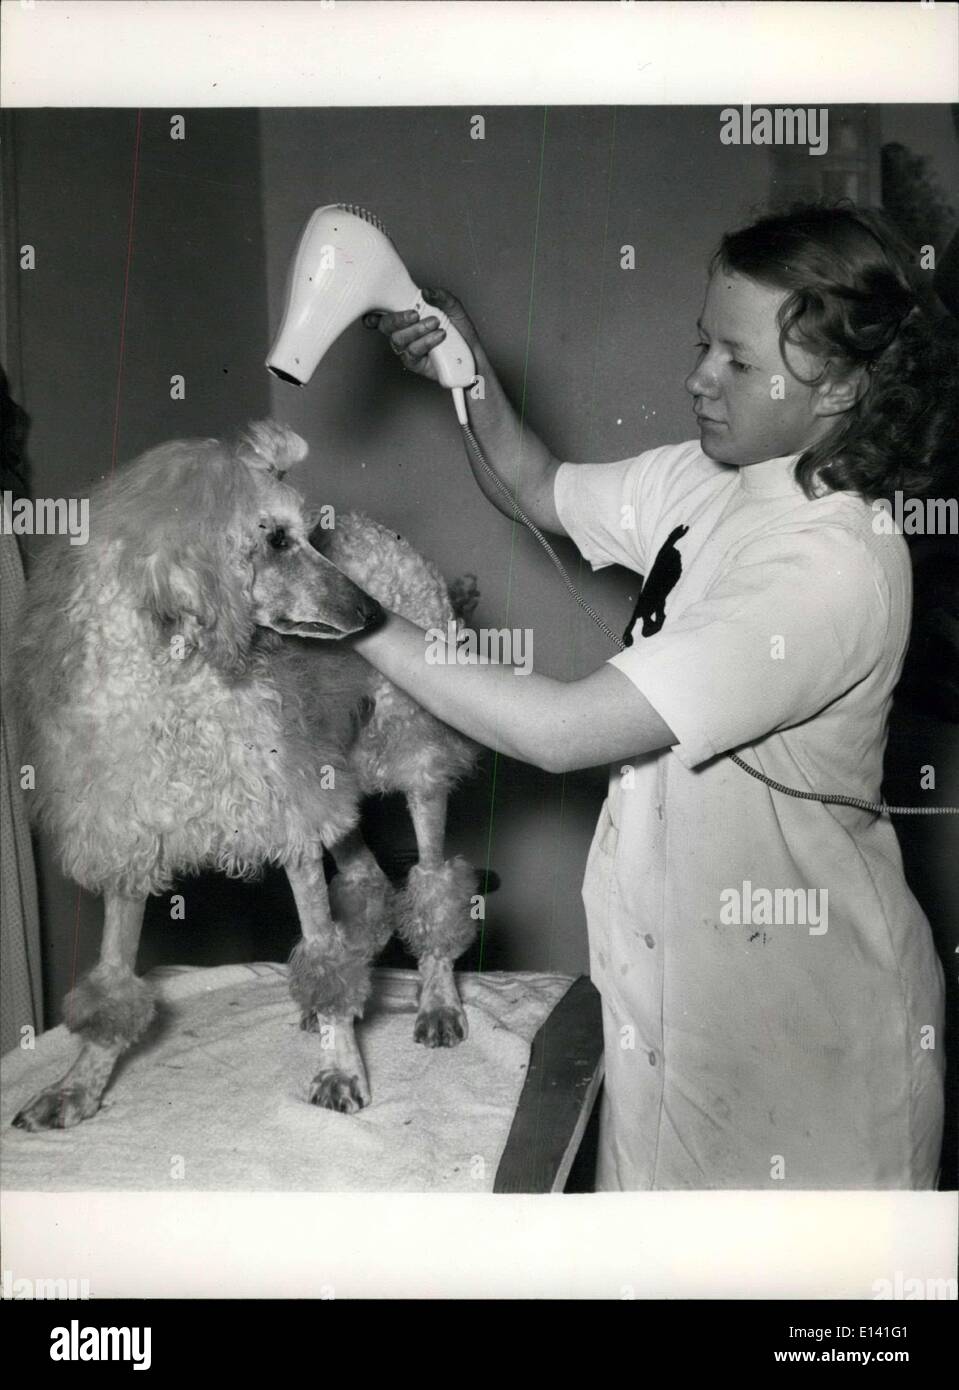 Mar. 31, 2012 - A Poodle gets a dry after a dye: A few minutes under the hair drier, and another Poodle will be ready for any fashion parade. Stock Photo